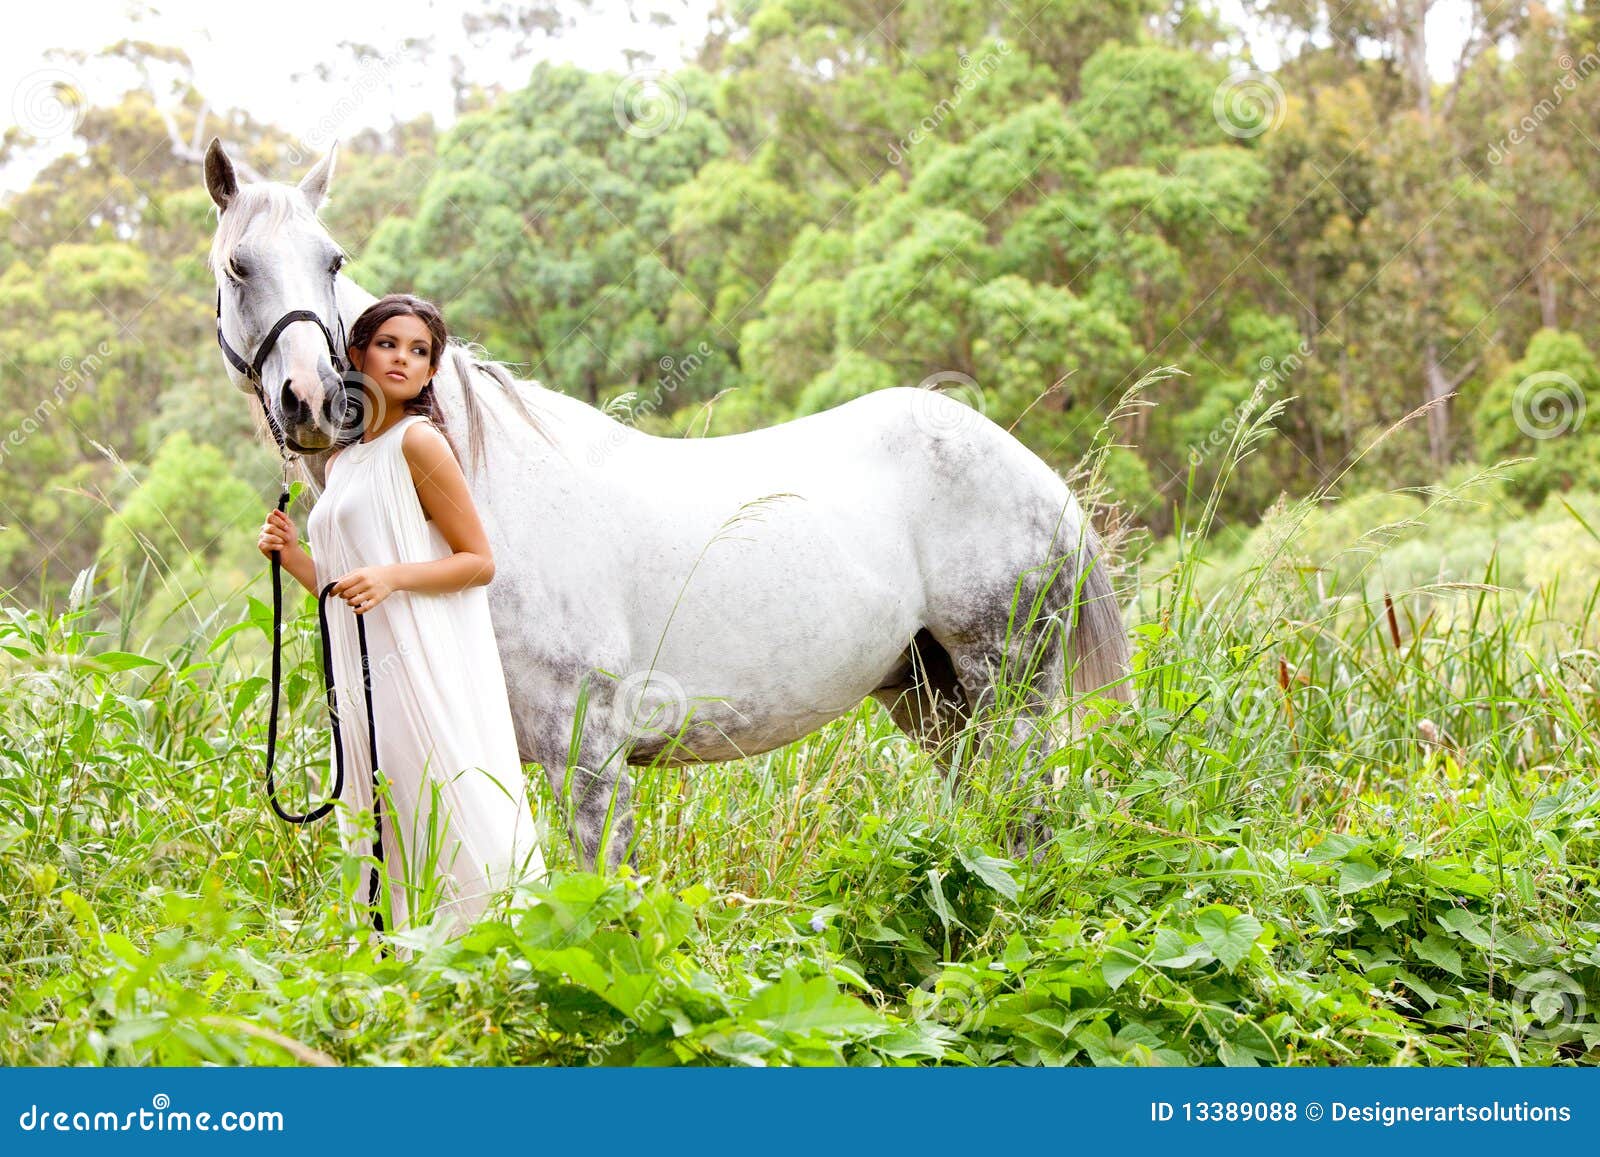 Young Woman With A White Horse Stock Image - Image of 